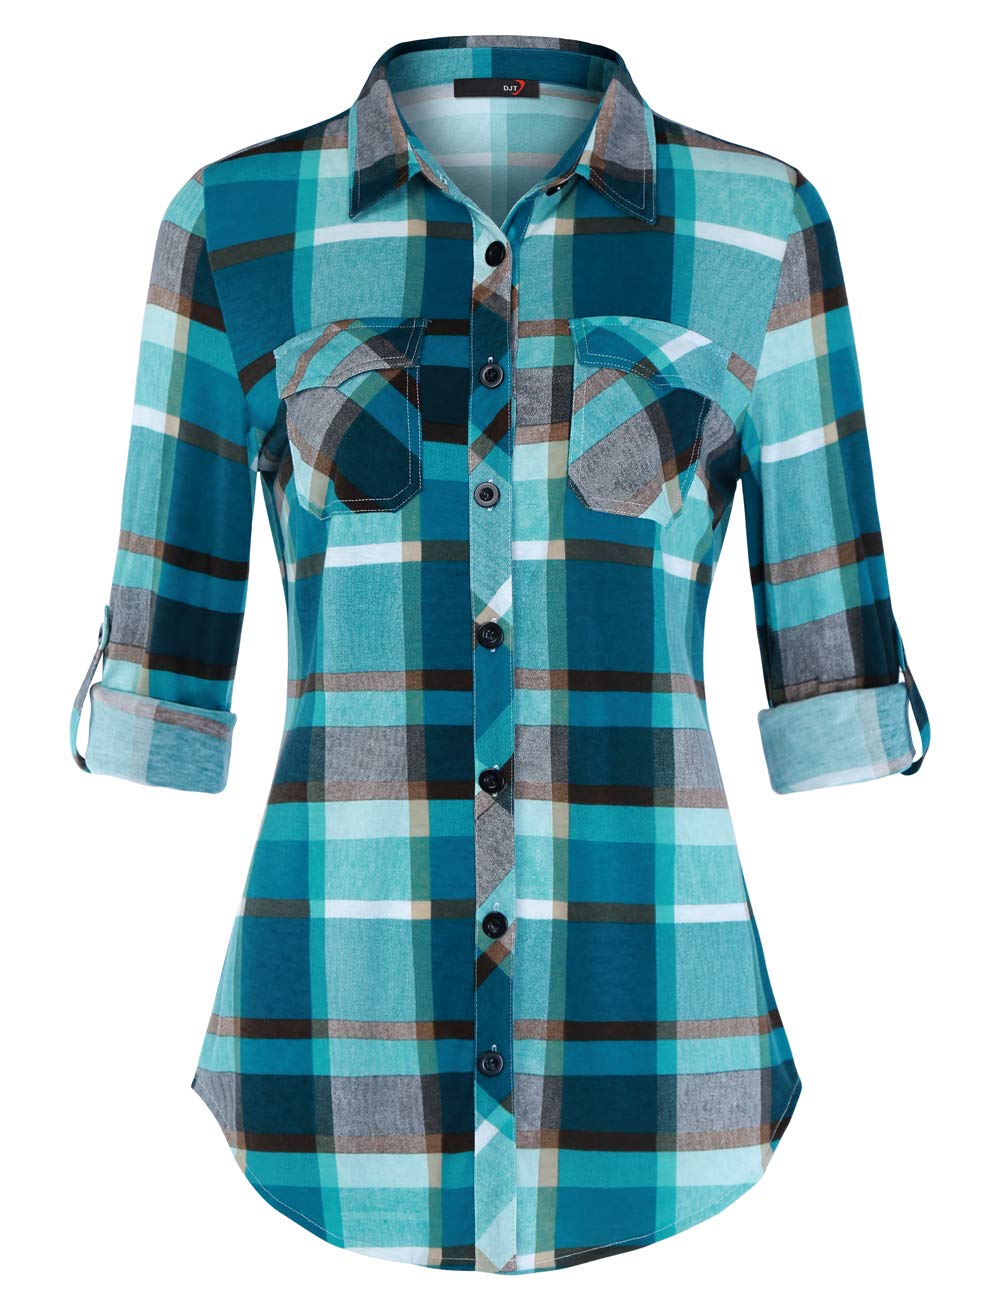 DJT Roll Up Long Sleeve Turquoise Women’s Collared Button Down Plaid Shirt